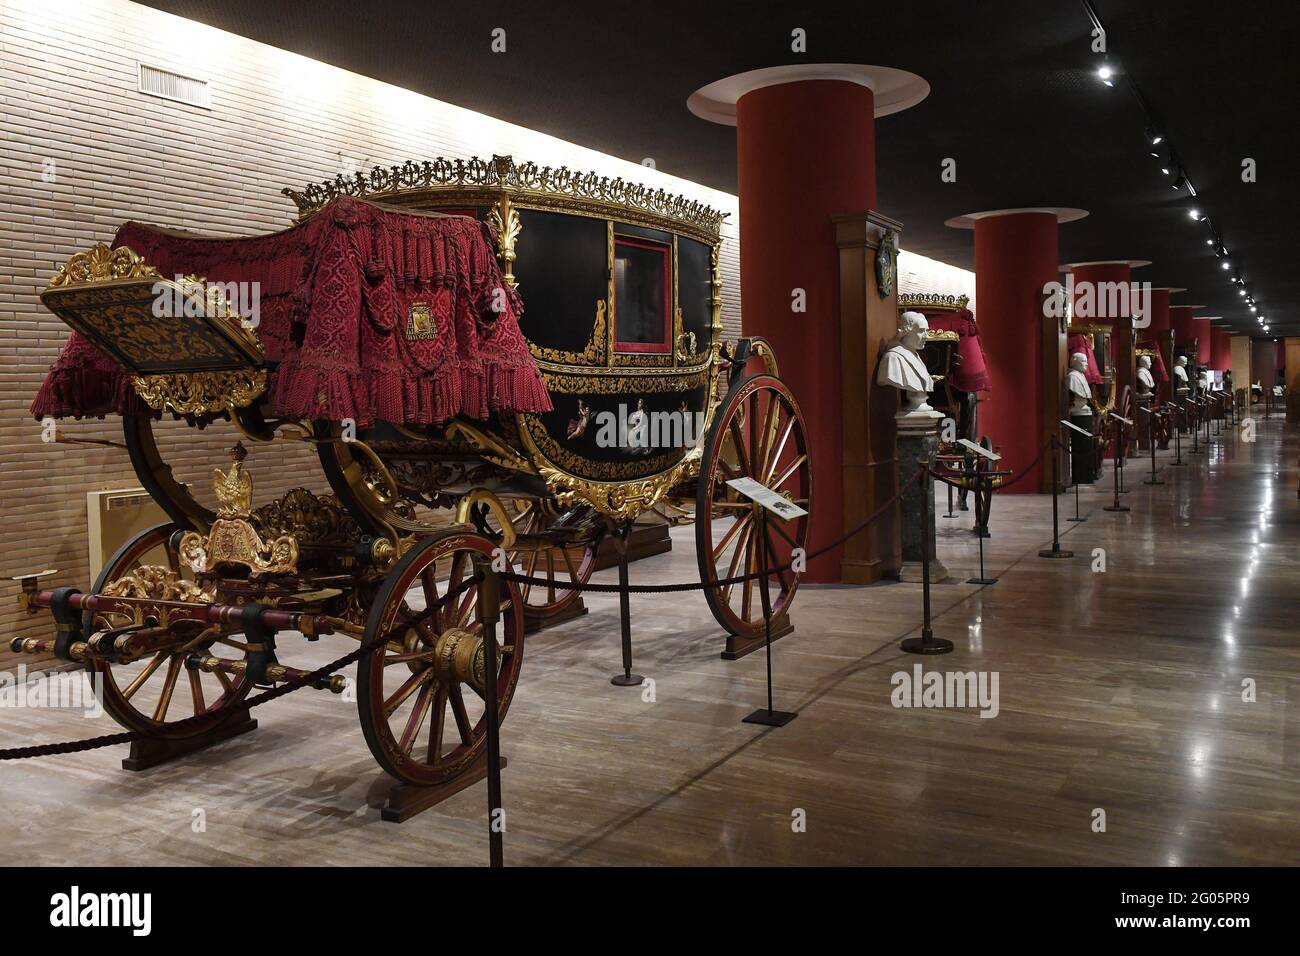 Berlin of Cardinal Lucien-Louis Bonaparte (1868) within the carriage pavillon of the Vatican Museums on March 2021.- Inaugurated in 1973 by pope Paul VI the carriage pavillon (Padiglione delle Carrozze) of the Vatican Museums shows a collection of ceremonial berlins, sedan chairs, various automobiles and popemobiles belonging to Pontiffs or Princes of the Holy Roman Church. - Assembled in Rome by Gaetano Peroni, supplier to the Papal Stables, using parts of French craftsmanship, this elegant Berlin belonged to Cardinal Lucien-Louis Bonaparte, who had received it as a gift from his cousin Napol Stock Photo